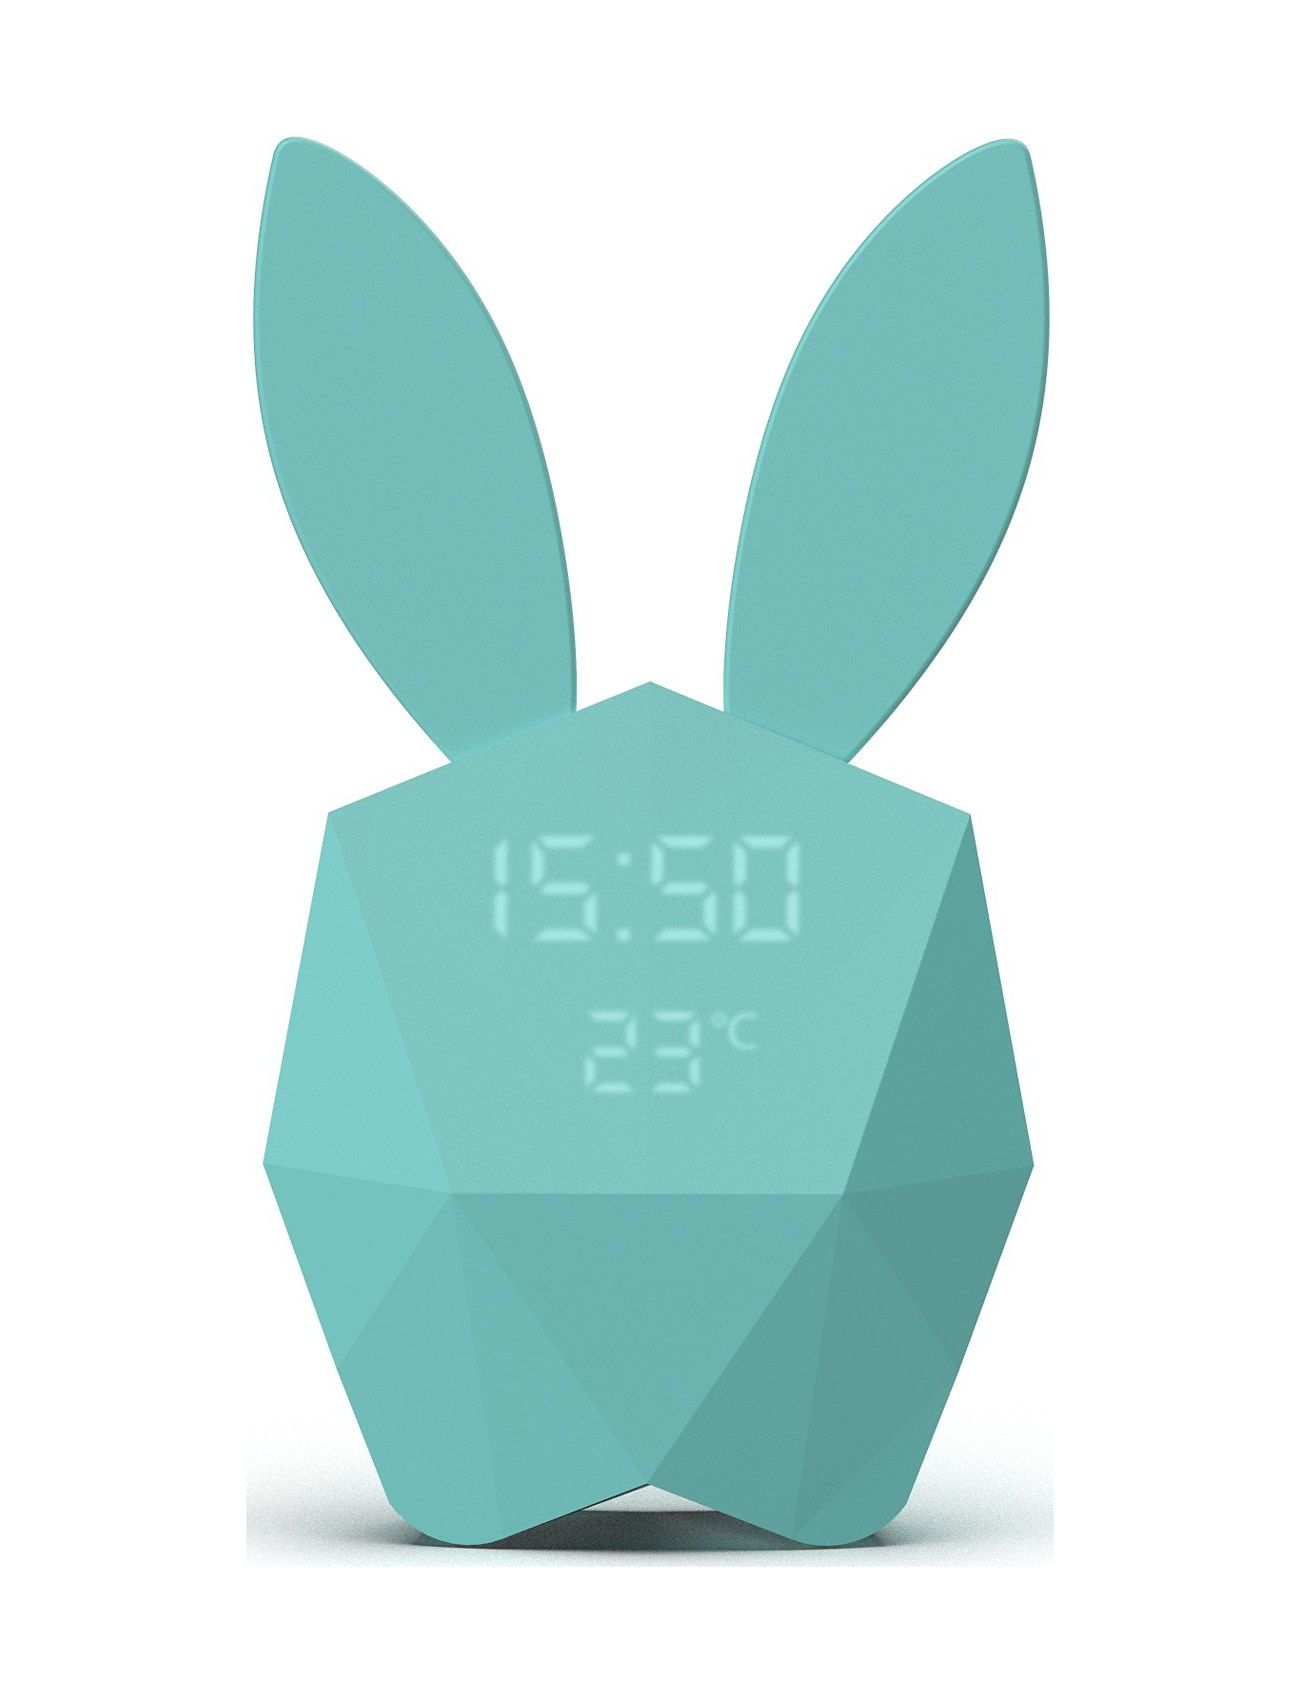 Cutie Clock Connect With App Home Decoration Watches Alarm Clocks Green Mobility On Board